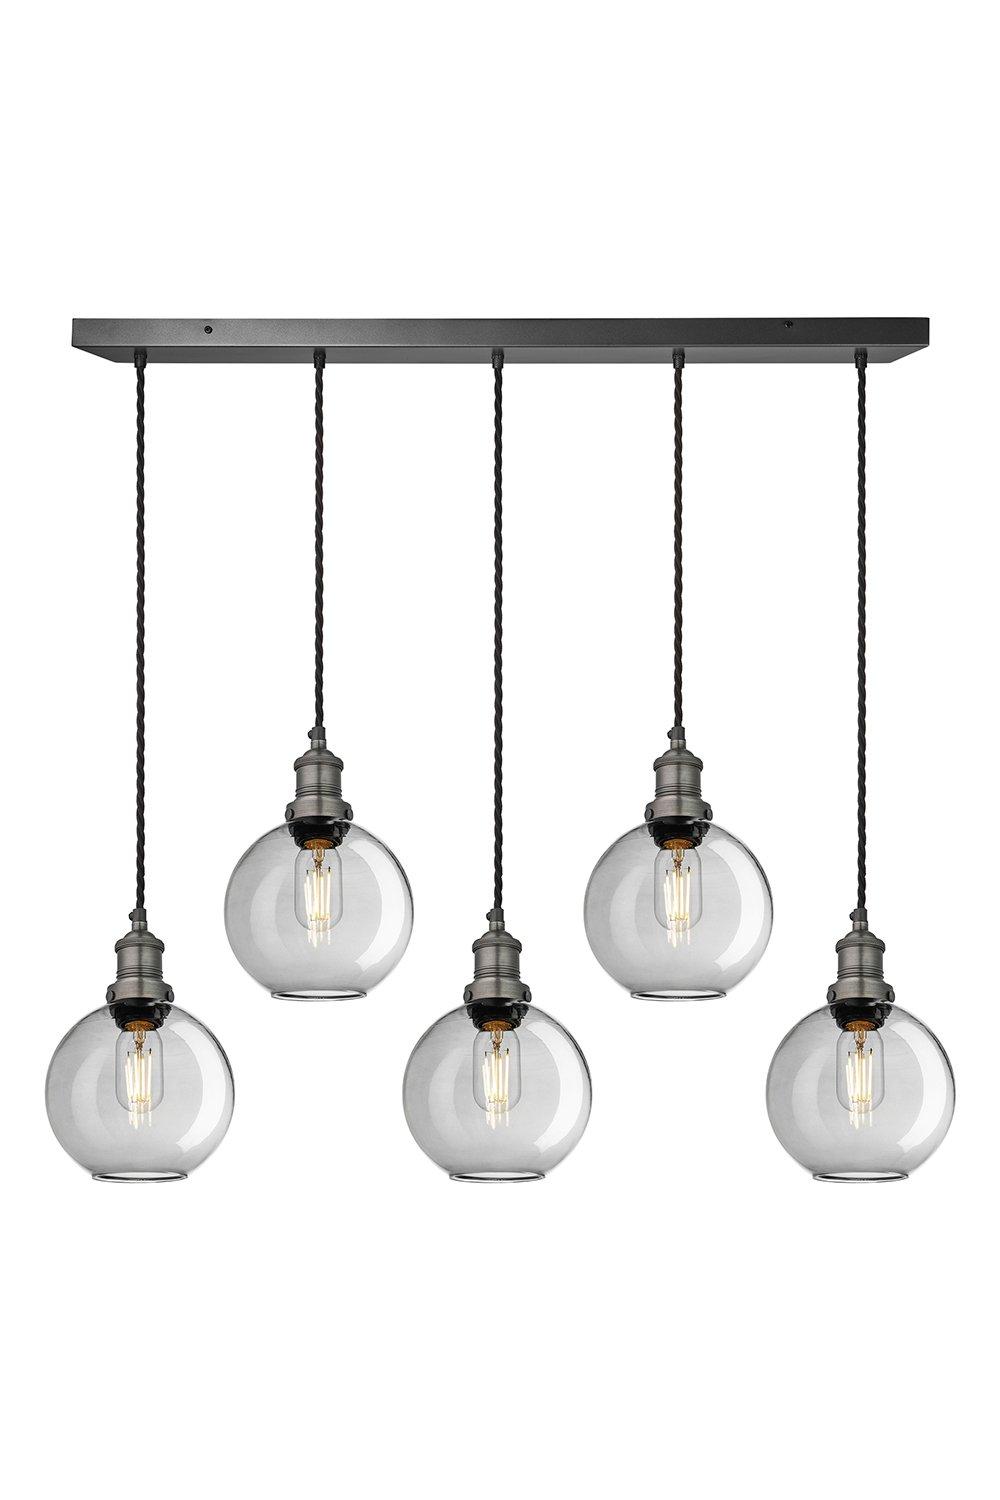 Brooklyn Tinted Glass Globe 5 Wire Cluster Lights, 7 inch, Smoke Grey, Pewter holder